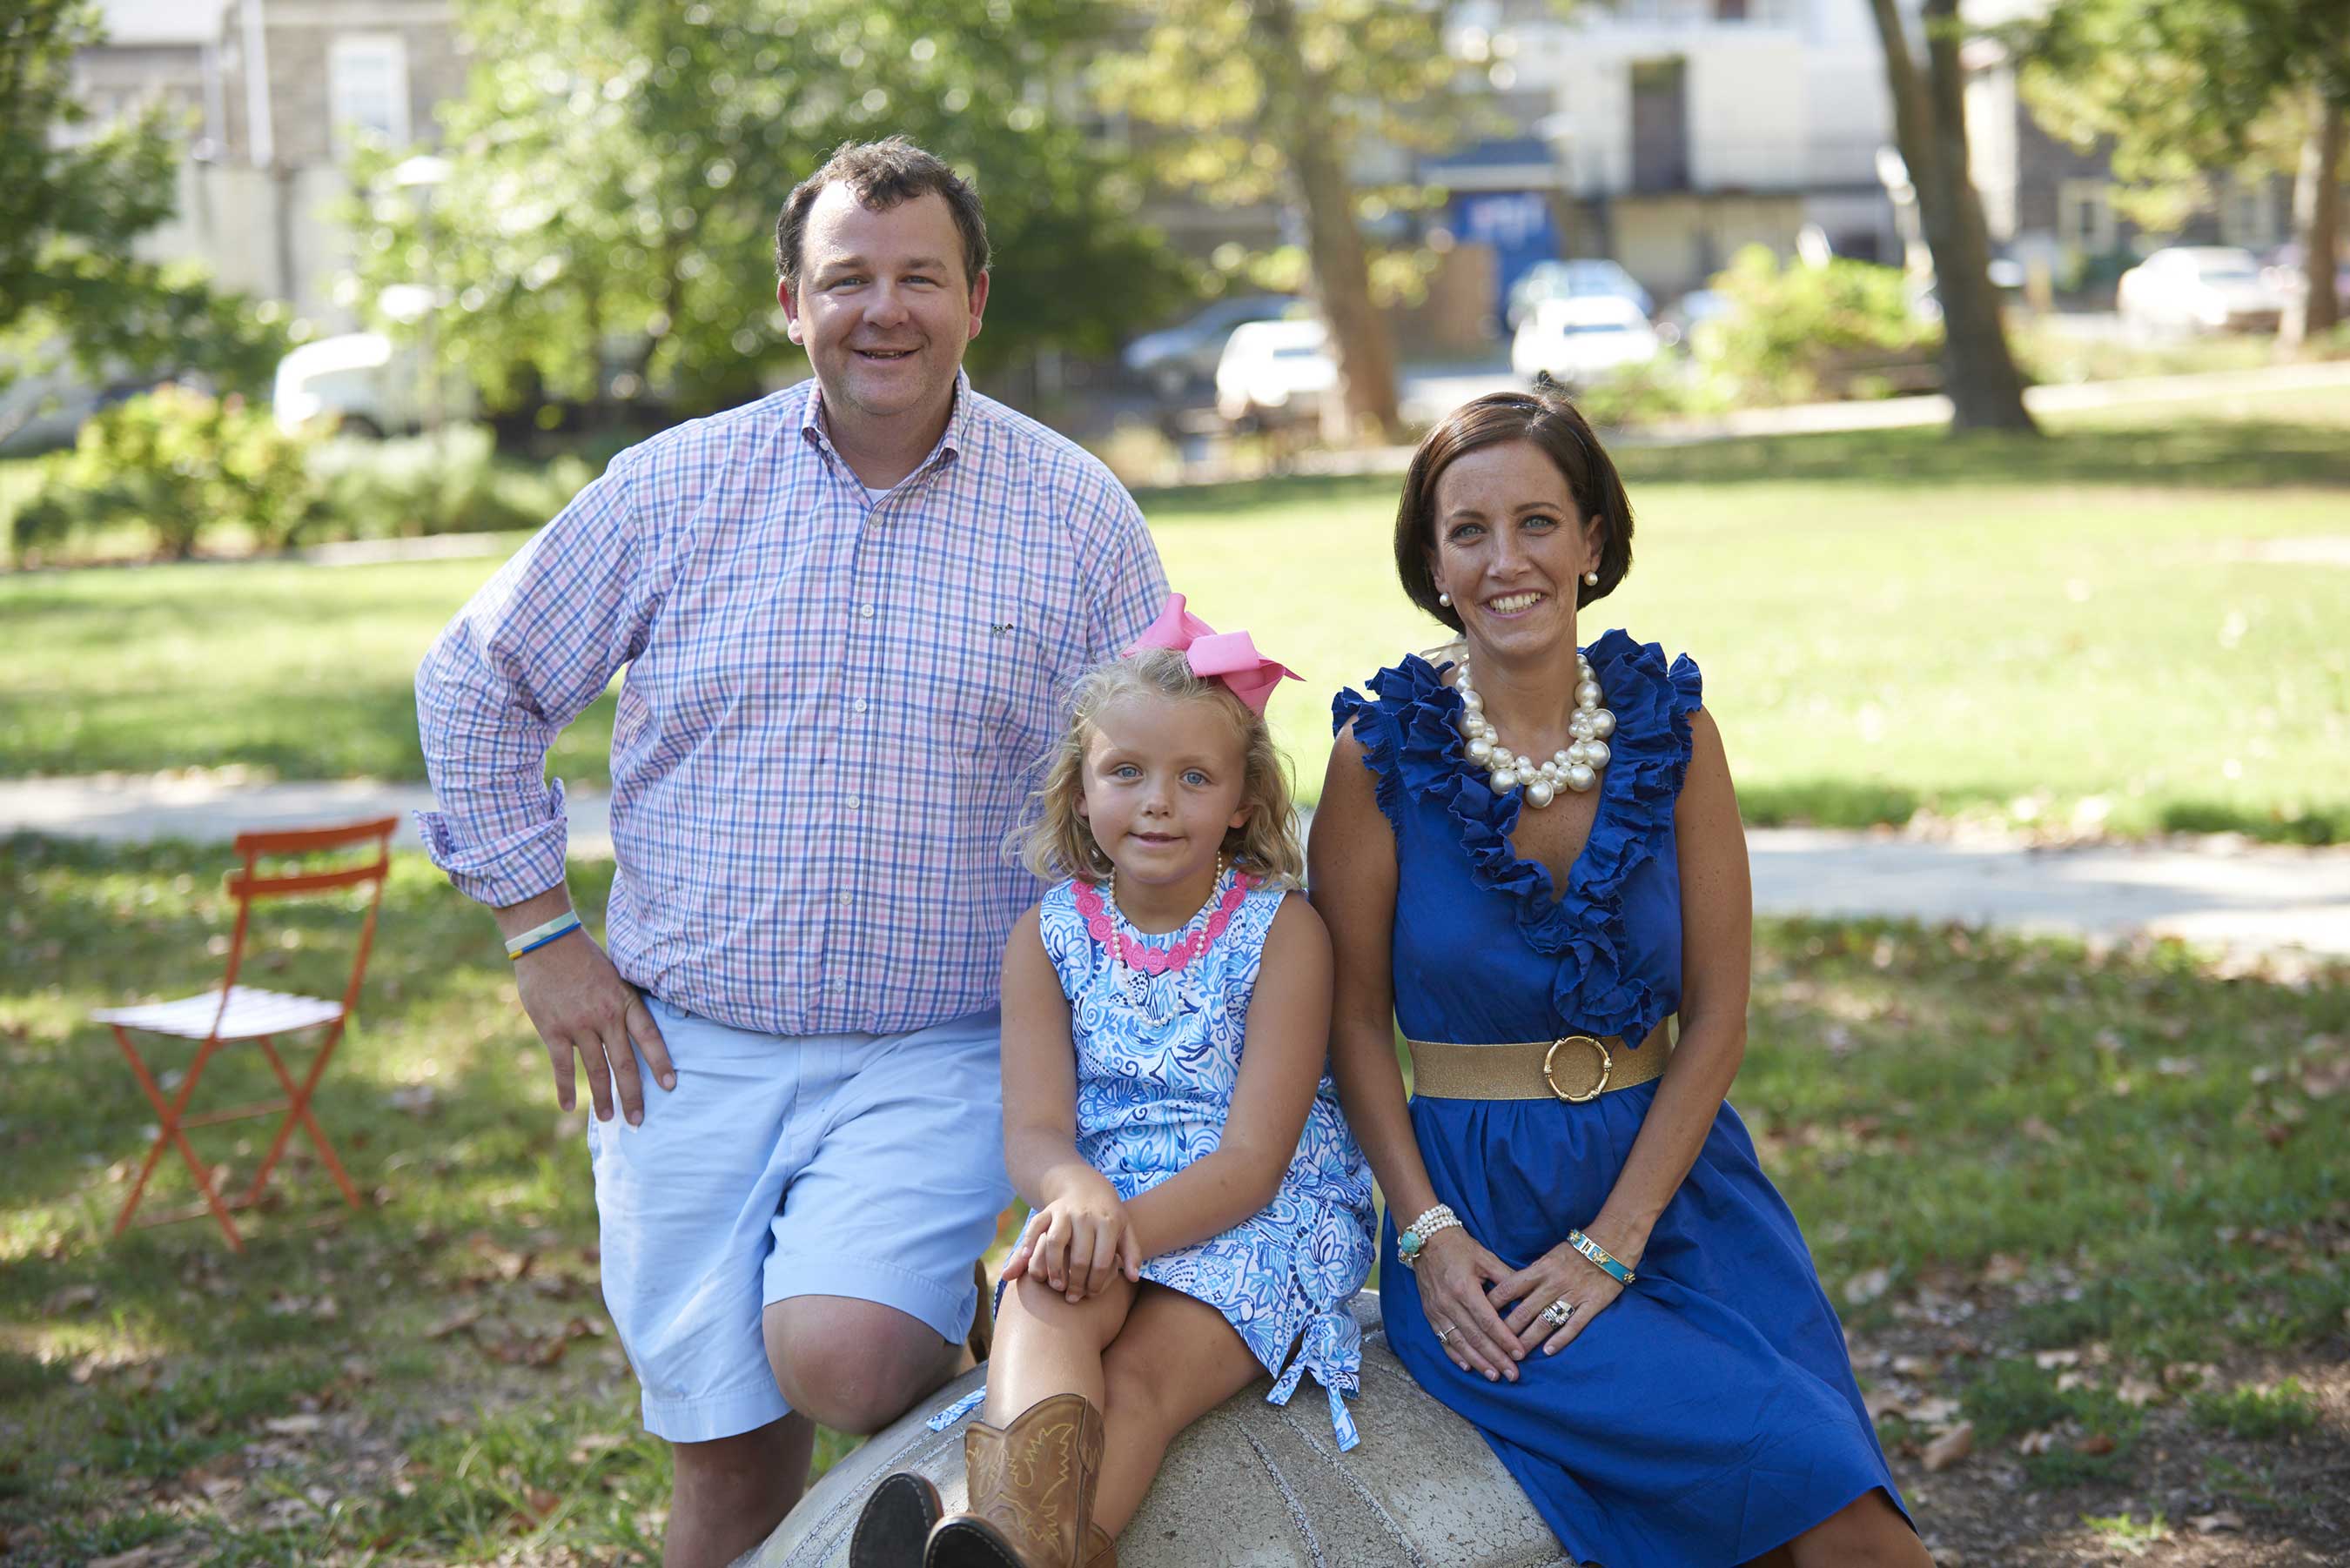 Edie Gilger, 7, poses with her parents, Nick and Emily Gilger. Edie and Emily fought cancer diagnoses together, and the family will ride on Northwestern Mutual’s Rose Parade® float to raise awareness for childhood cancer.